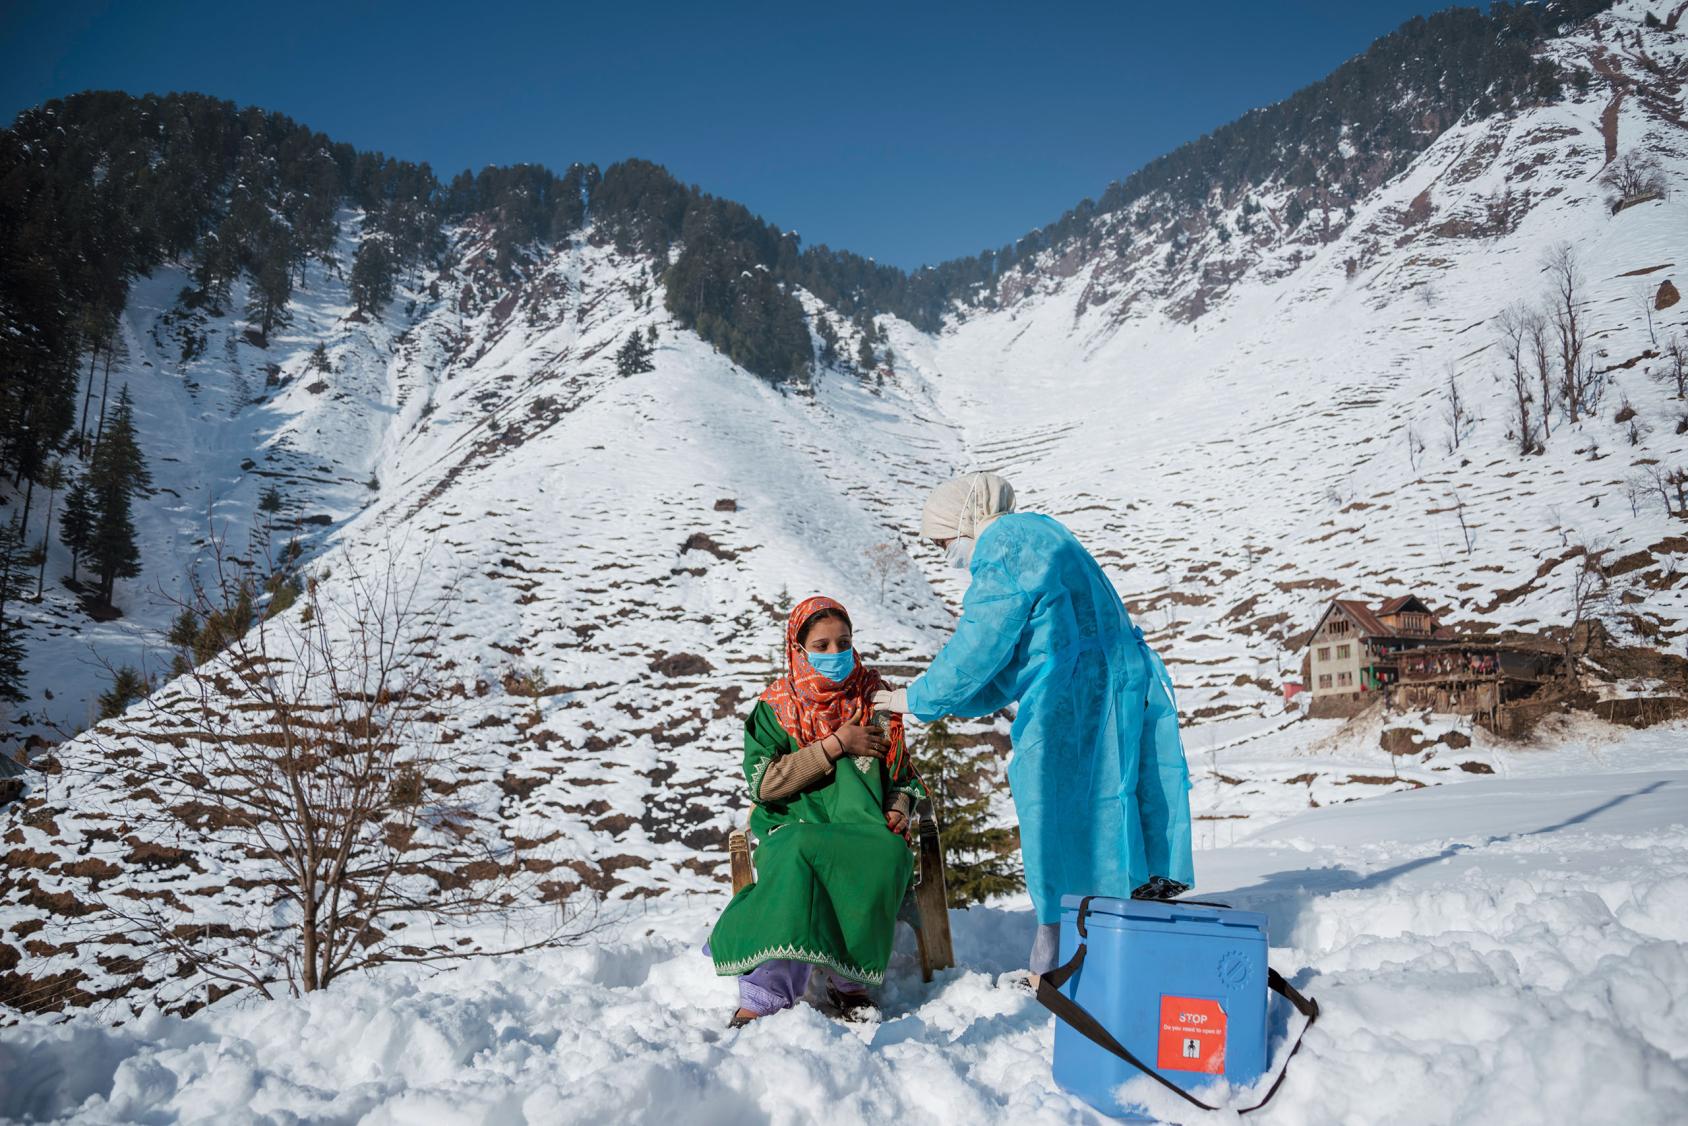 A woman gets vaccinated against COVID-19 on a snowy mountain top.